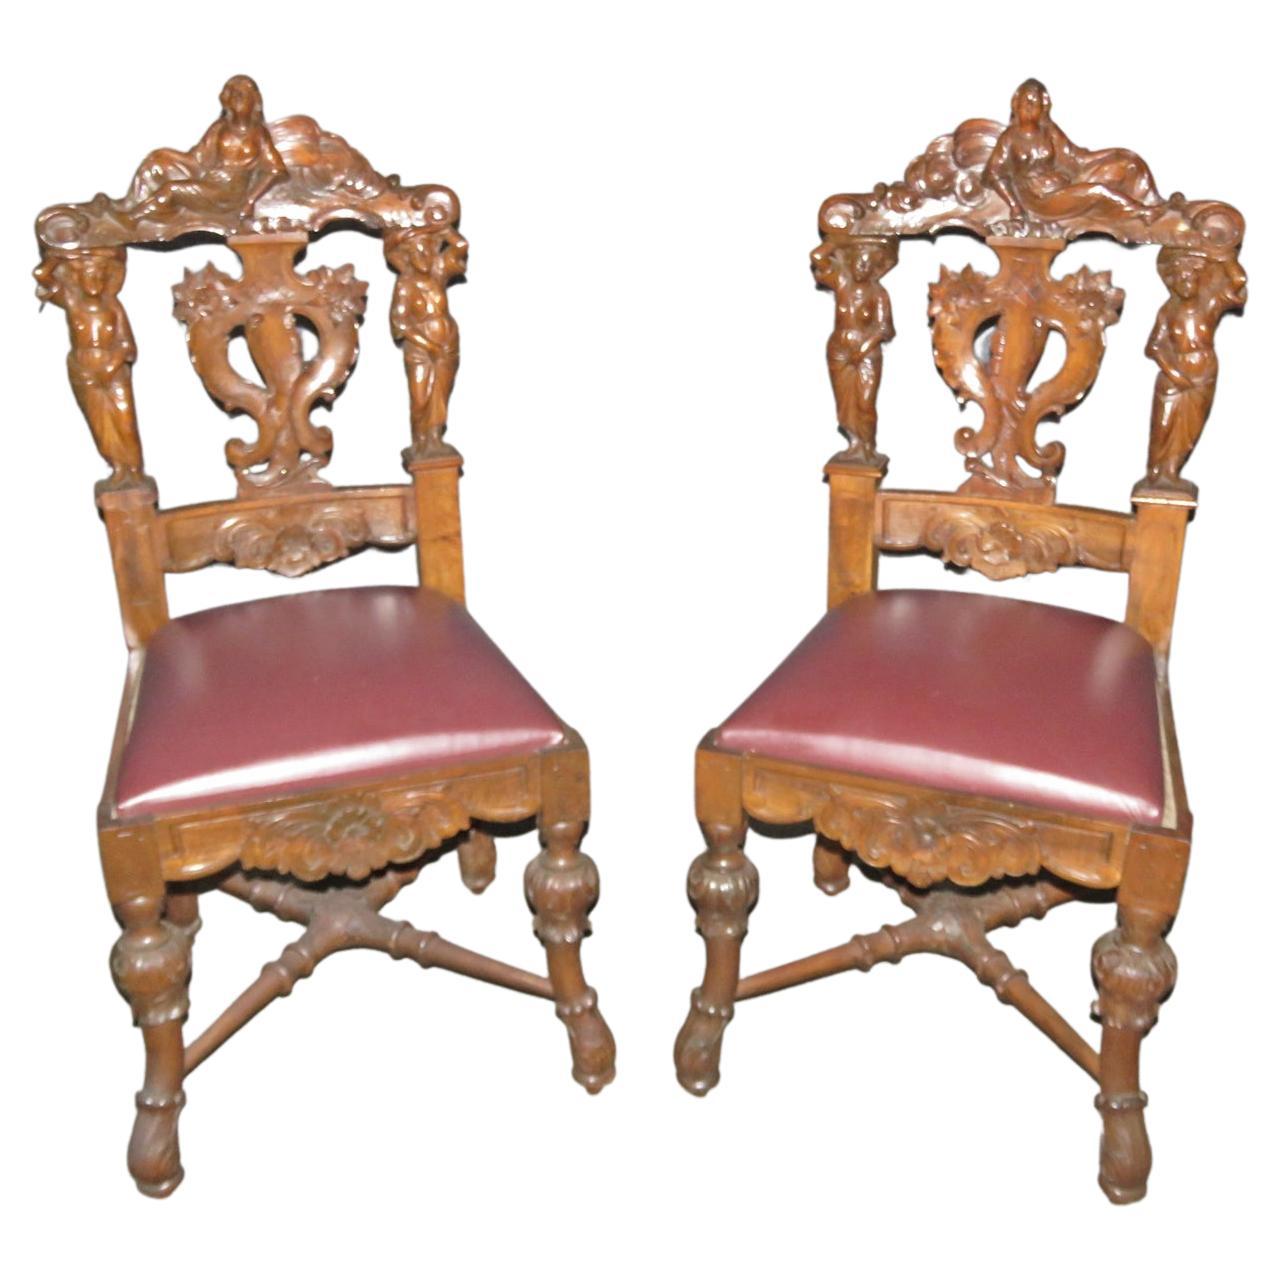 Pair of Figural Carved Walnut R.J. Horner Style Renaissance Chairs, circa 1880